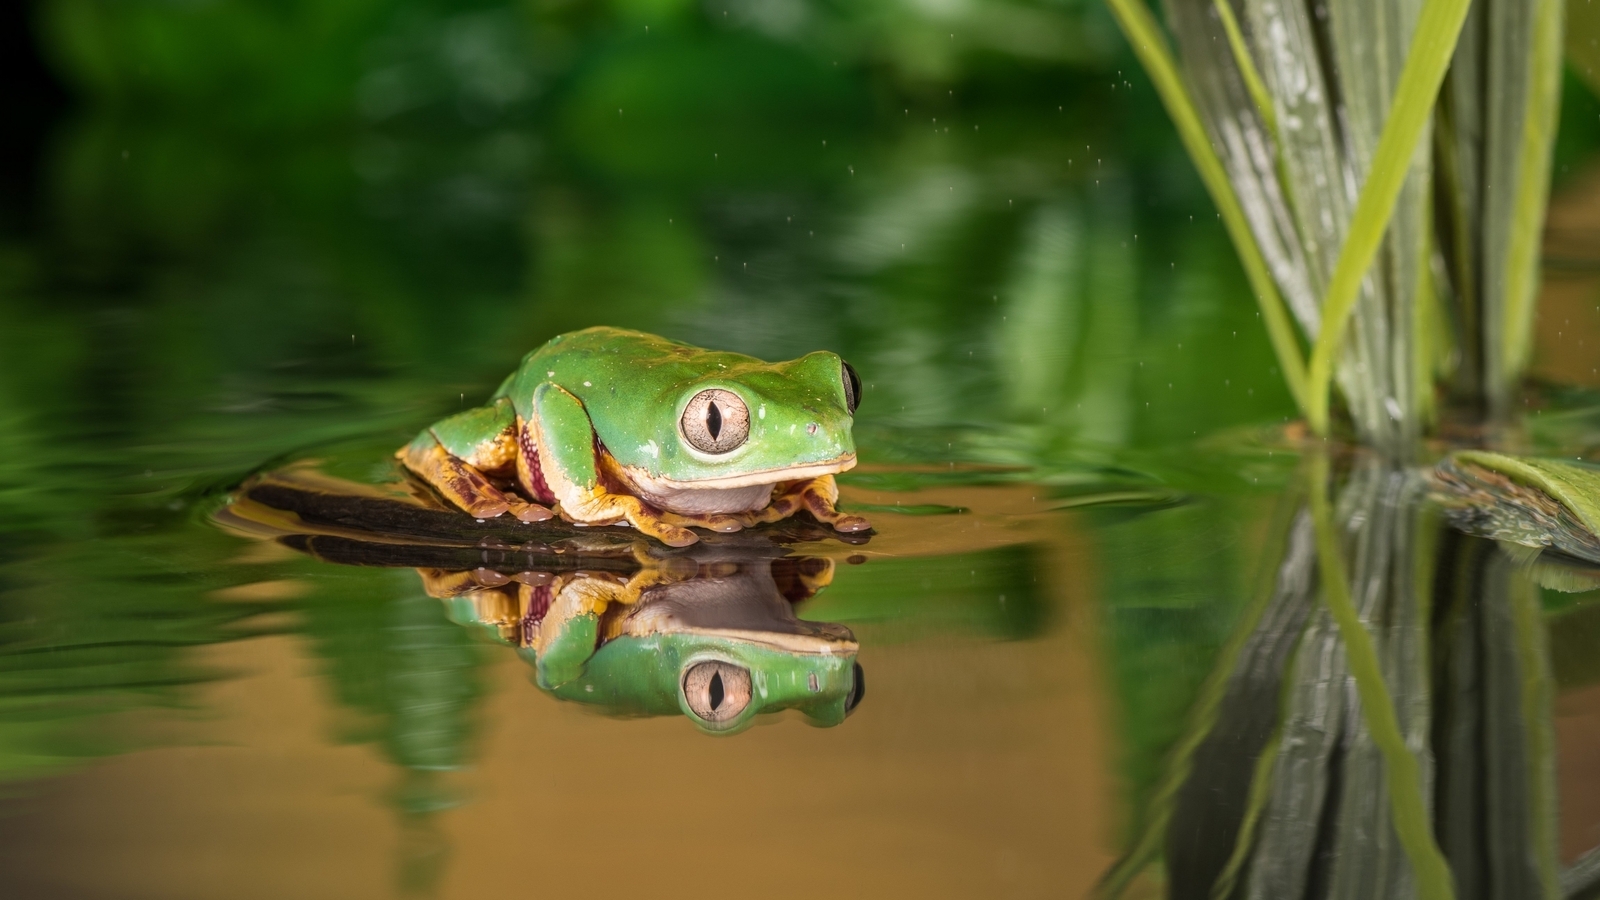 Image: tree frog, wood frog, water, reflection, grass